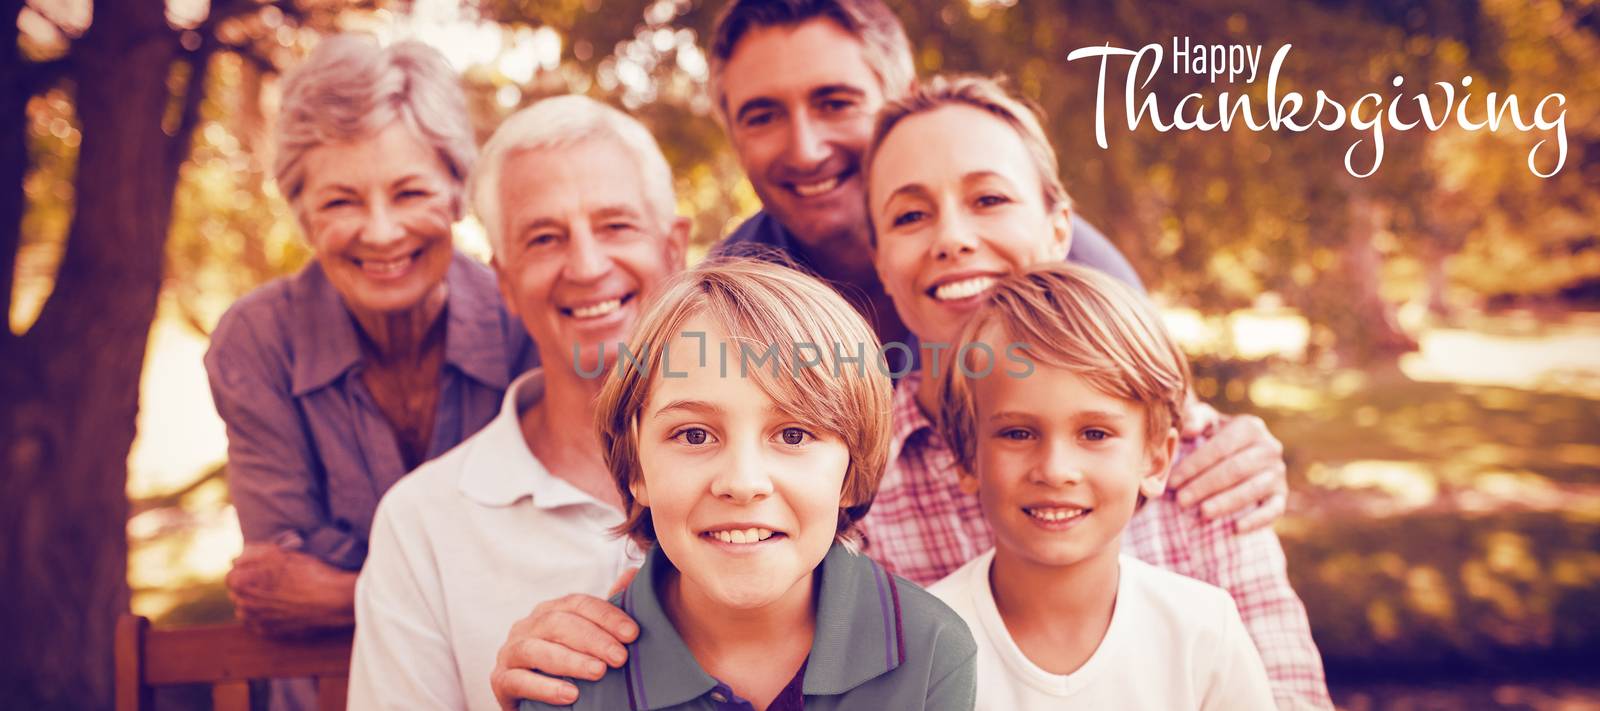 Illustration of happy thanksgiving day text greeting against happy family in park